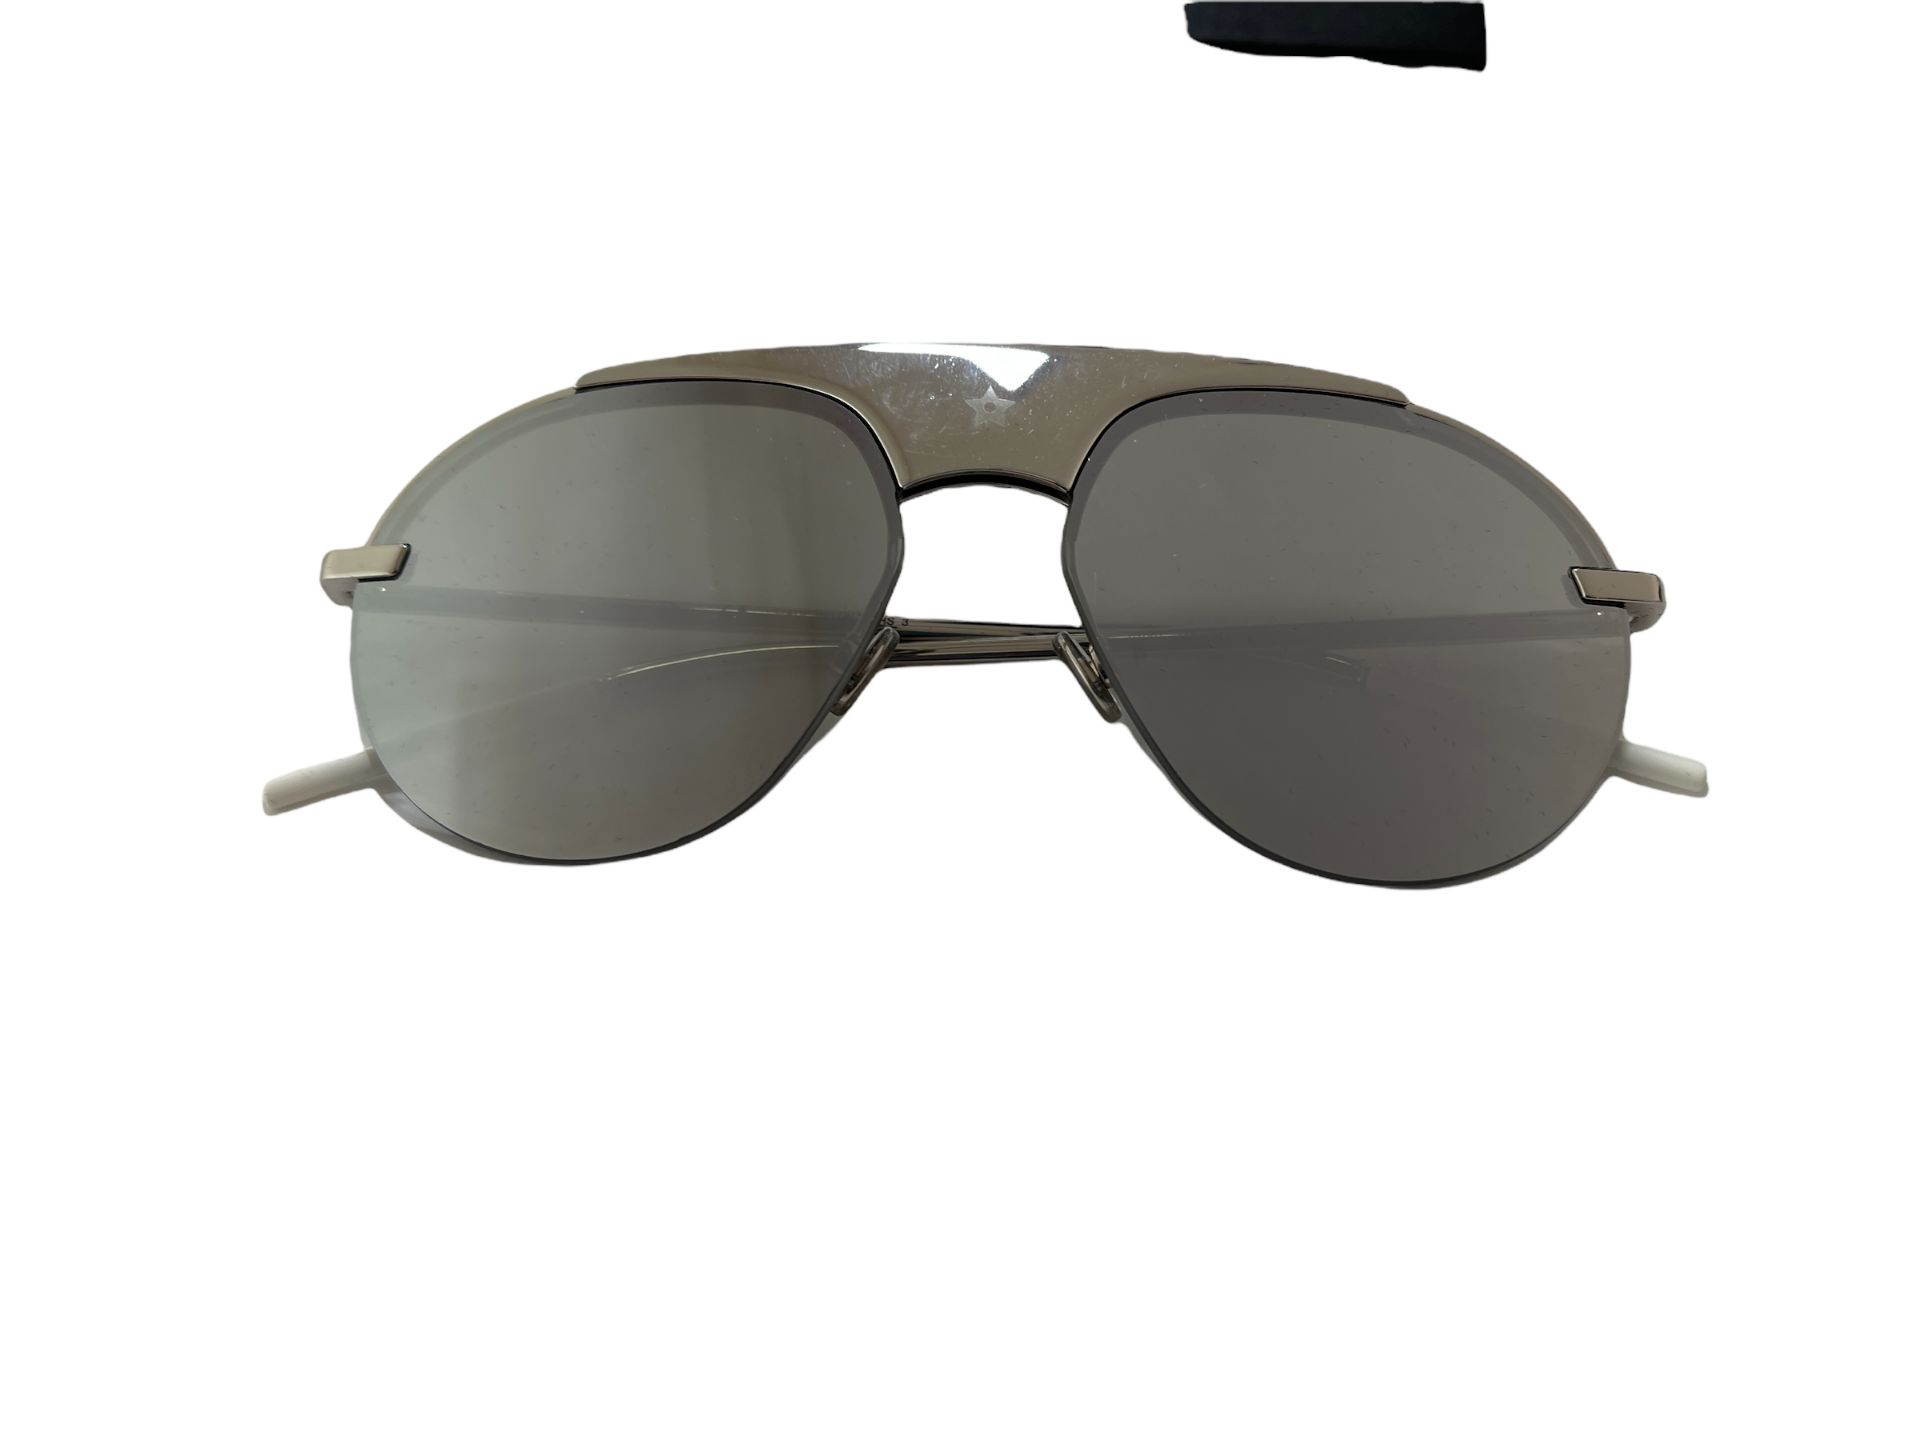 Dior Revolution Sunglasses 0100T Palladium/White 99mm - Surplus Stock from Our Private Jet Charter.. - Image 9 of 11